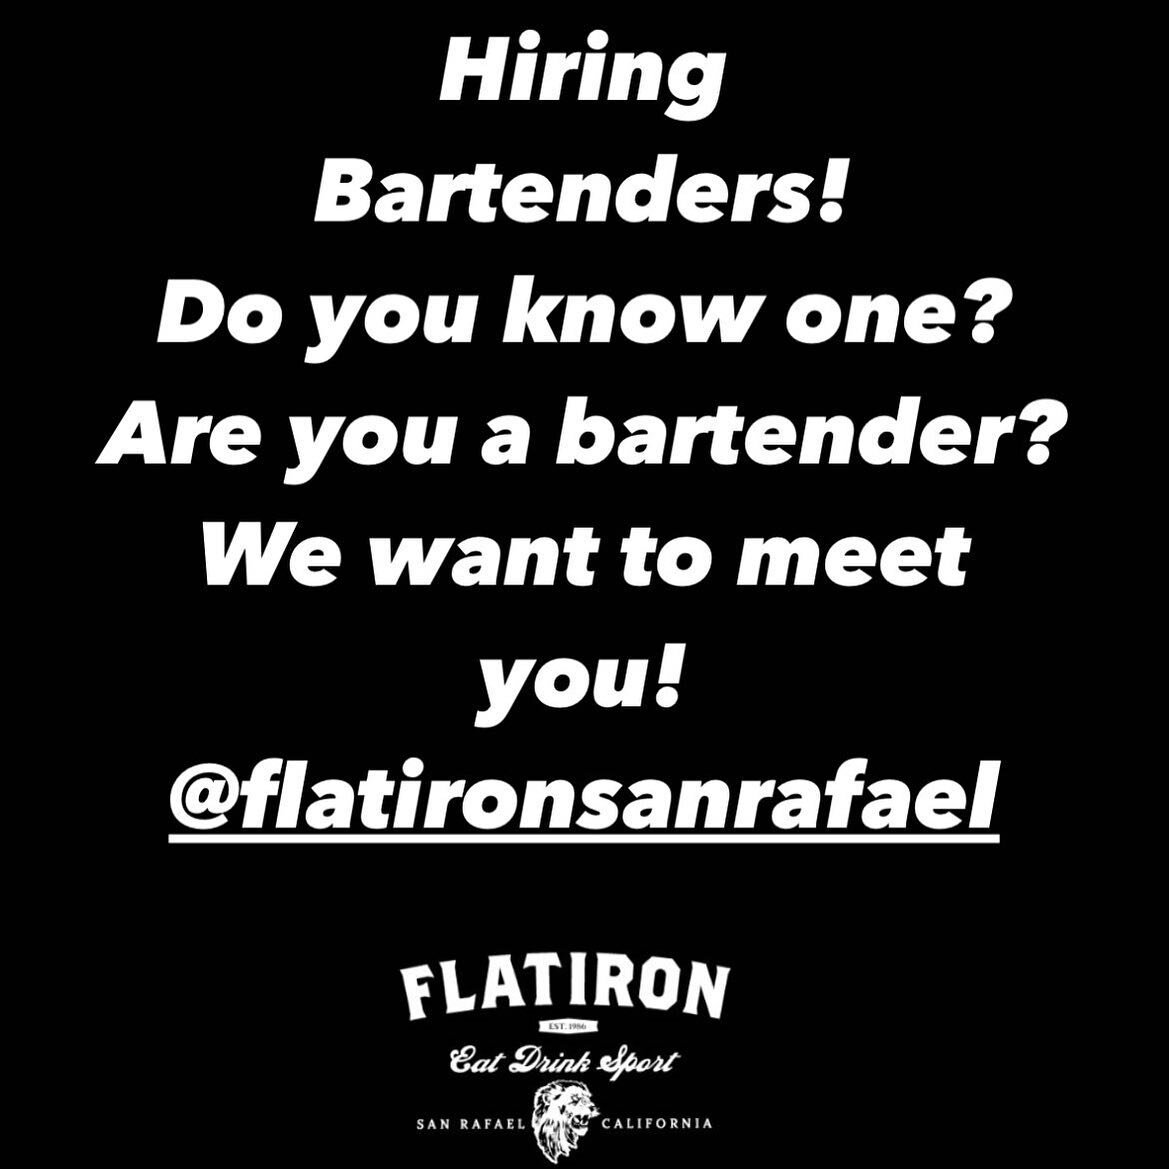 Hello! We are looking for a bartender! Apply in person or give us a call! We can&rsquo;t wait to meet you, or the person you tag in this post! #jobsearch #bartenderlife #emplymentopportunities #wafflefries #bar